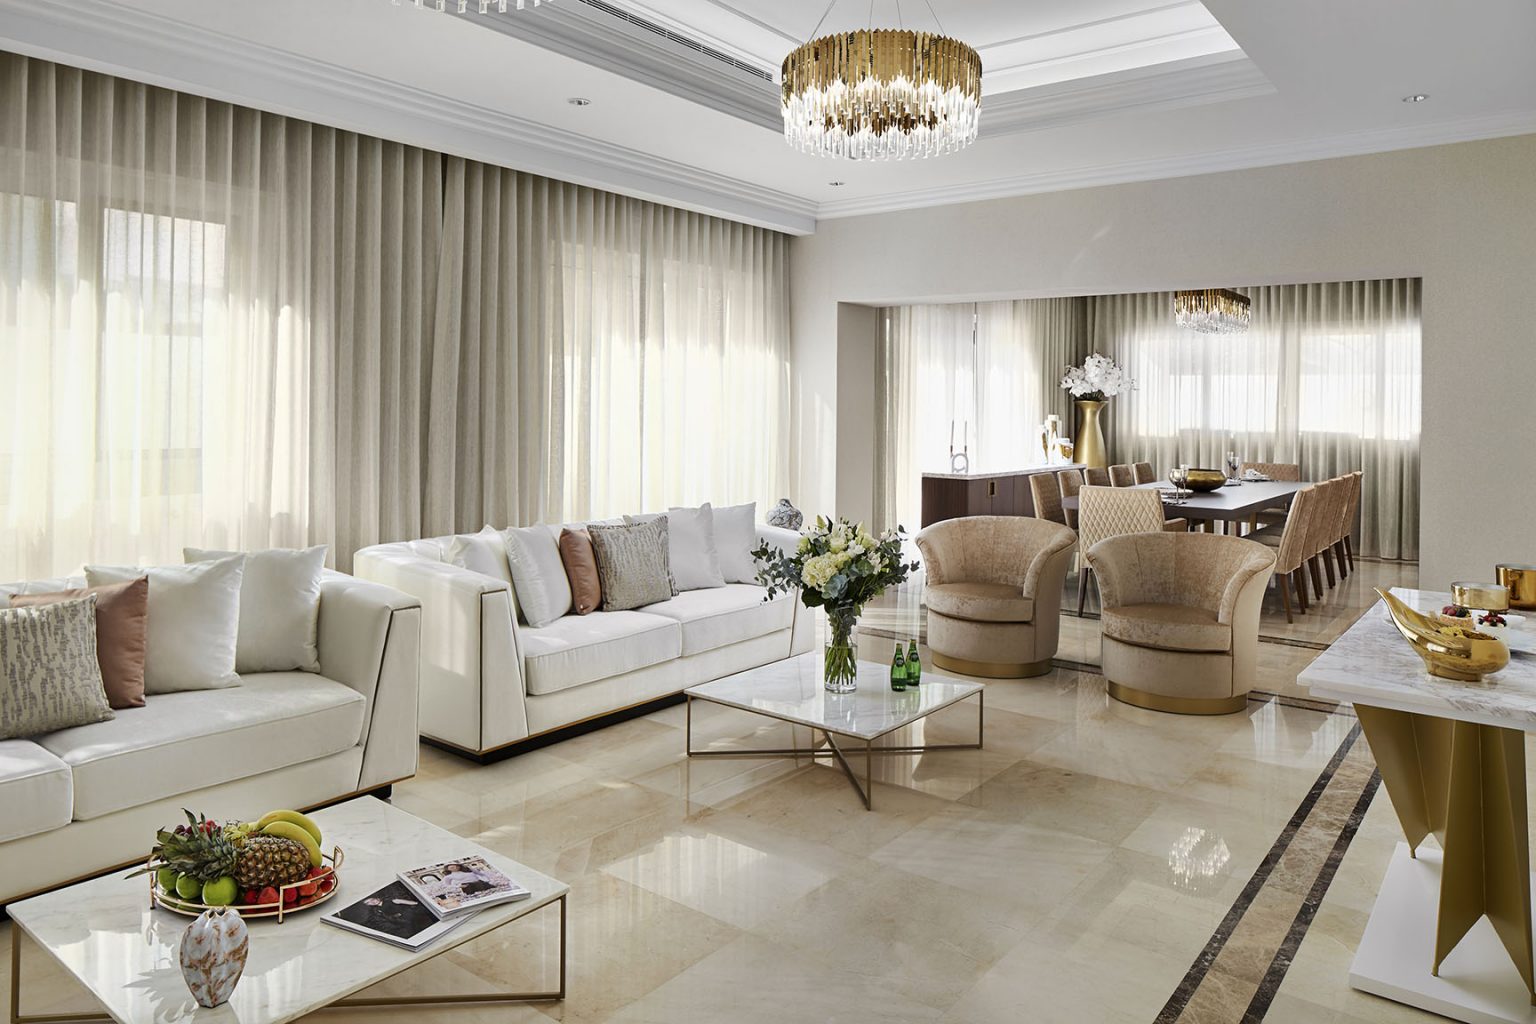 Meet The 25 Best Interior Designers In Sharjah You’ll Love_20